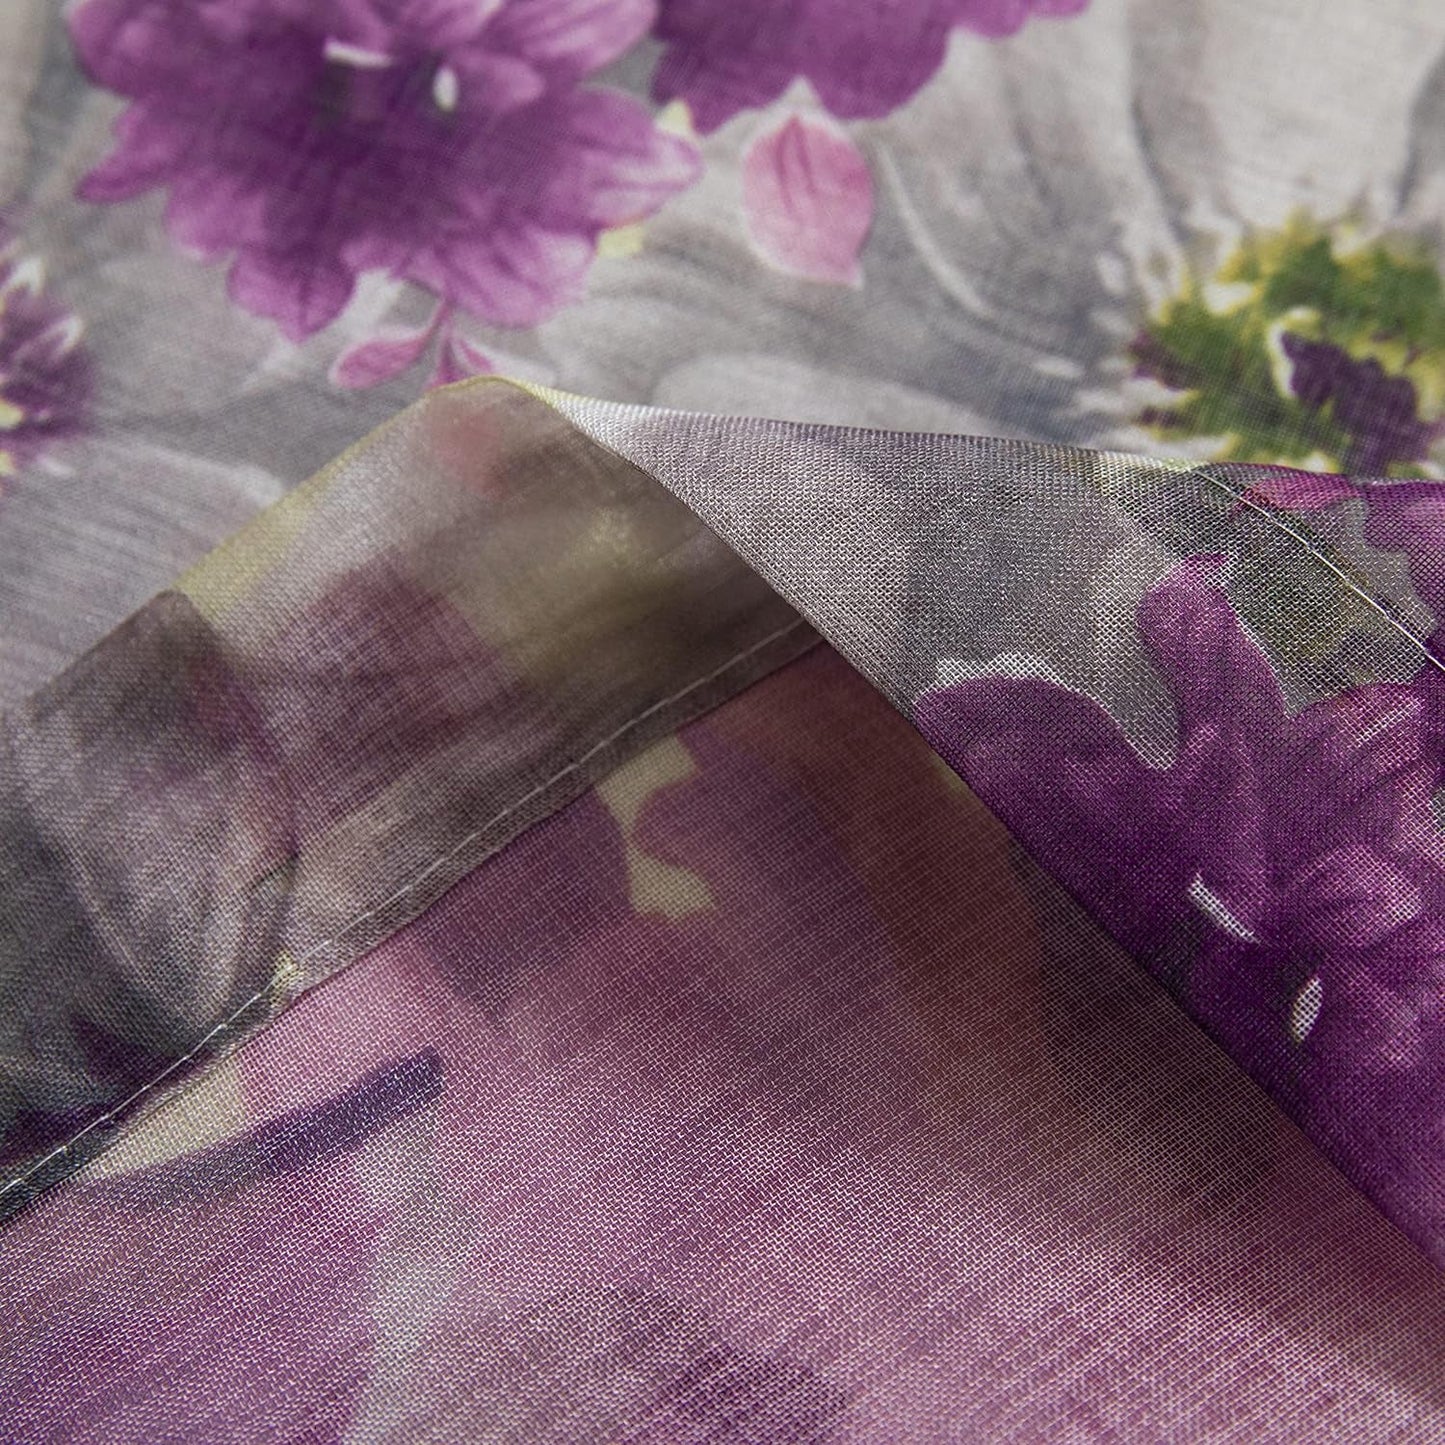 Floral Sheer Curtains 63 Inch Length Purple Flower Printed French Country Semi Sheer Curtain for Girls Bedroom Living Room Linen Look Blossom Patterned Rod Pocket Voile Drapes 2 Panels